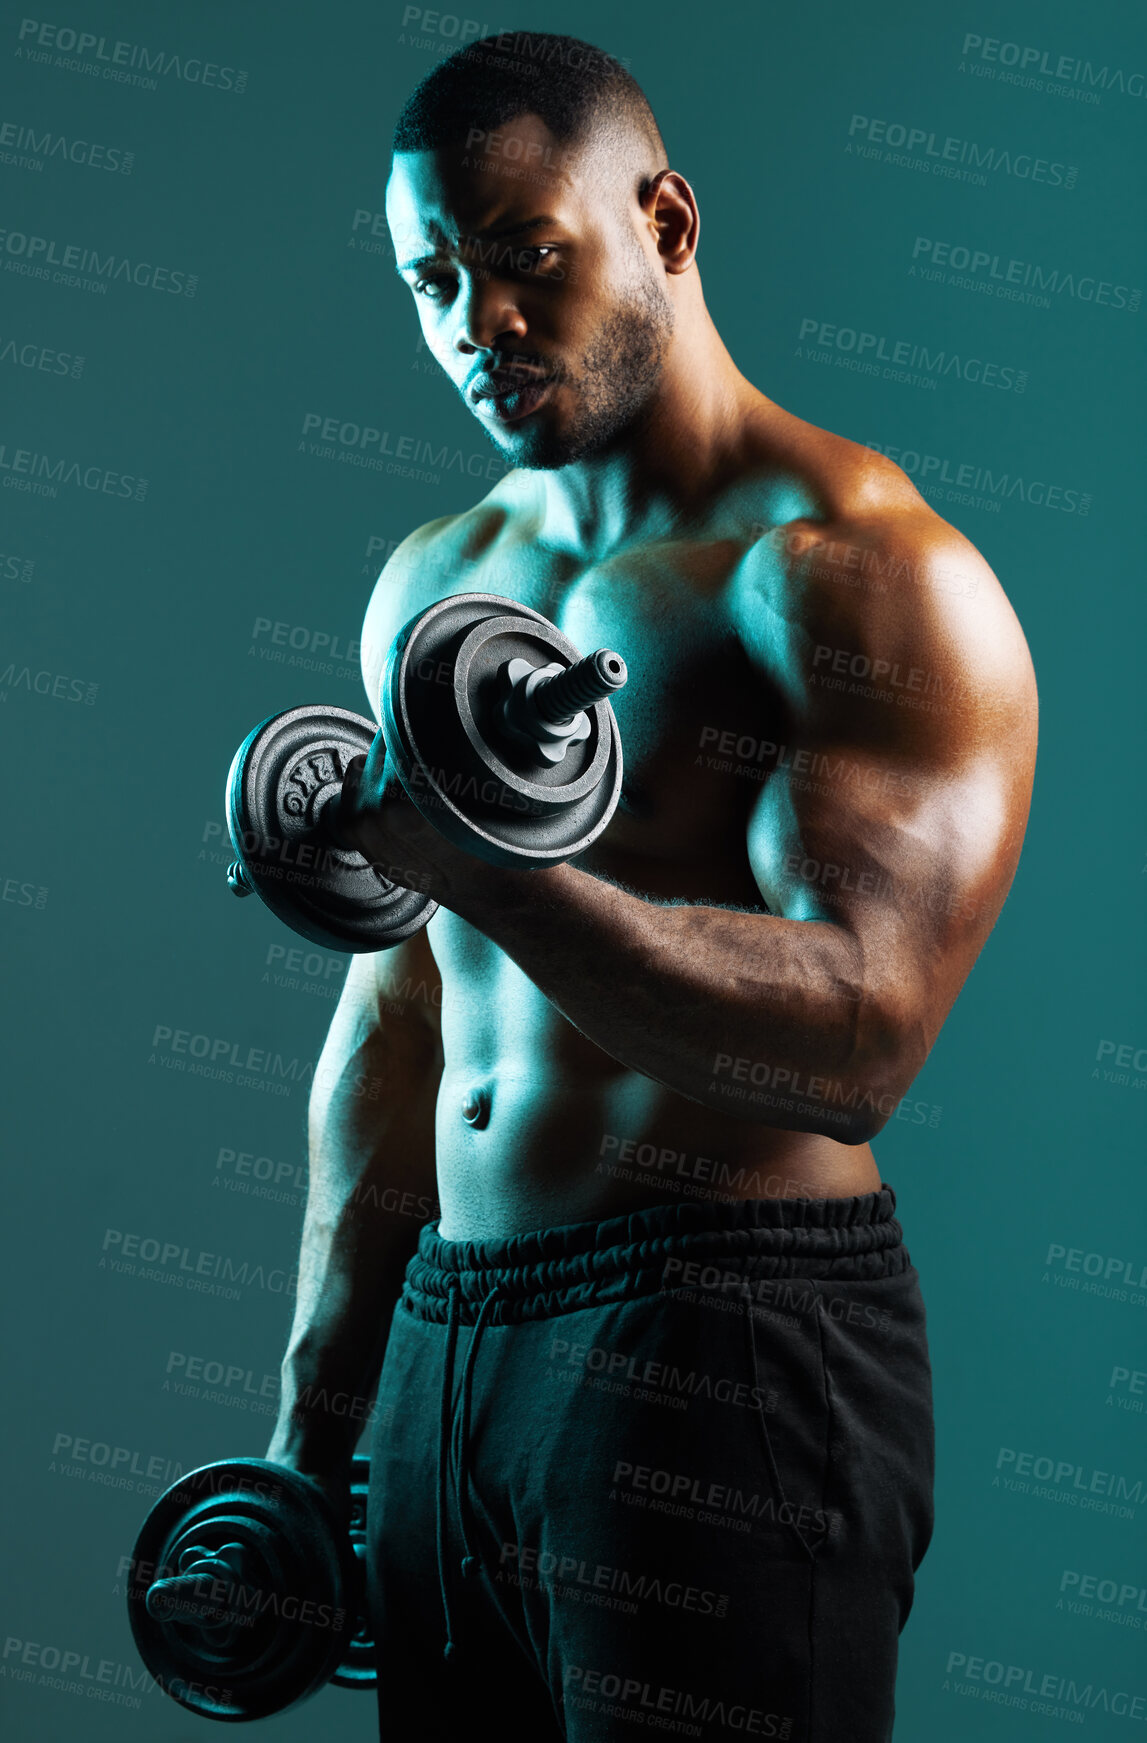 Buy stock photo Shot of a handsome young man lifting weights against a studio background